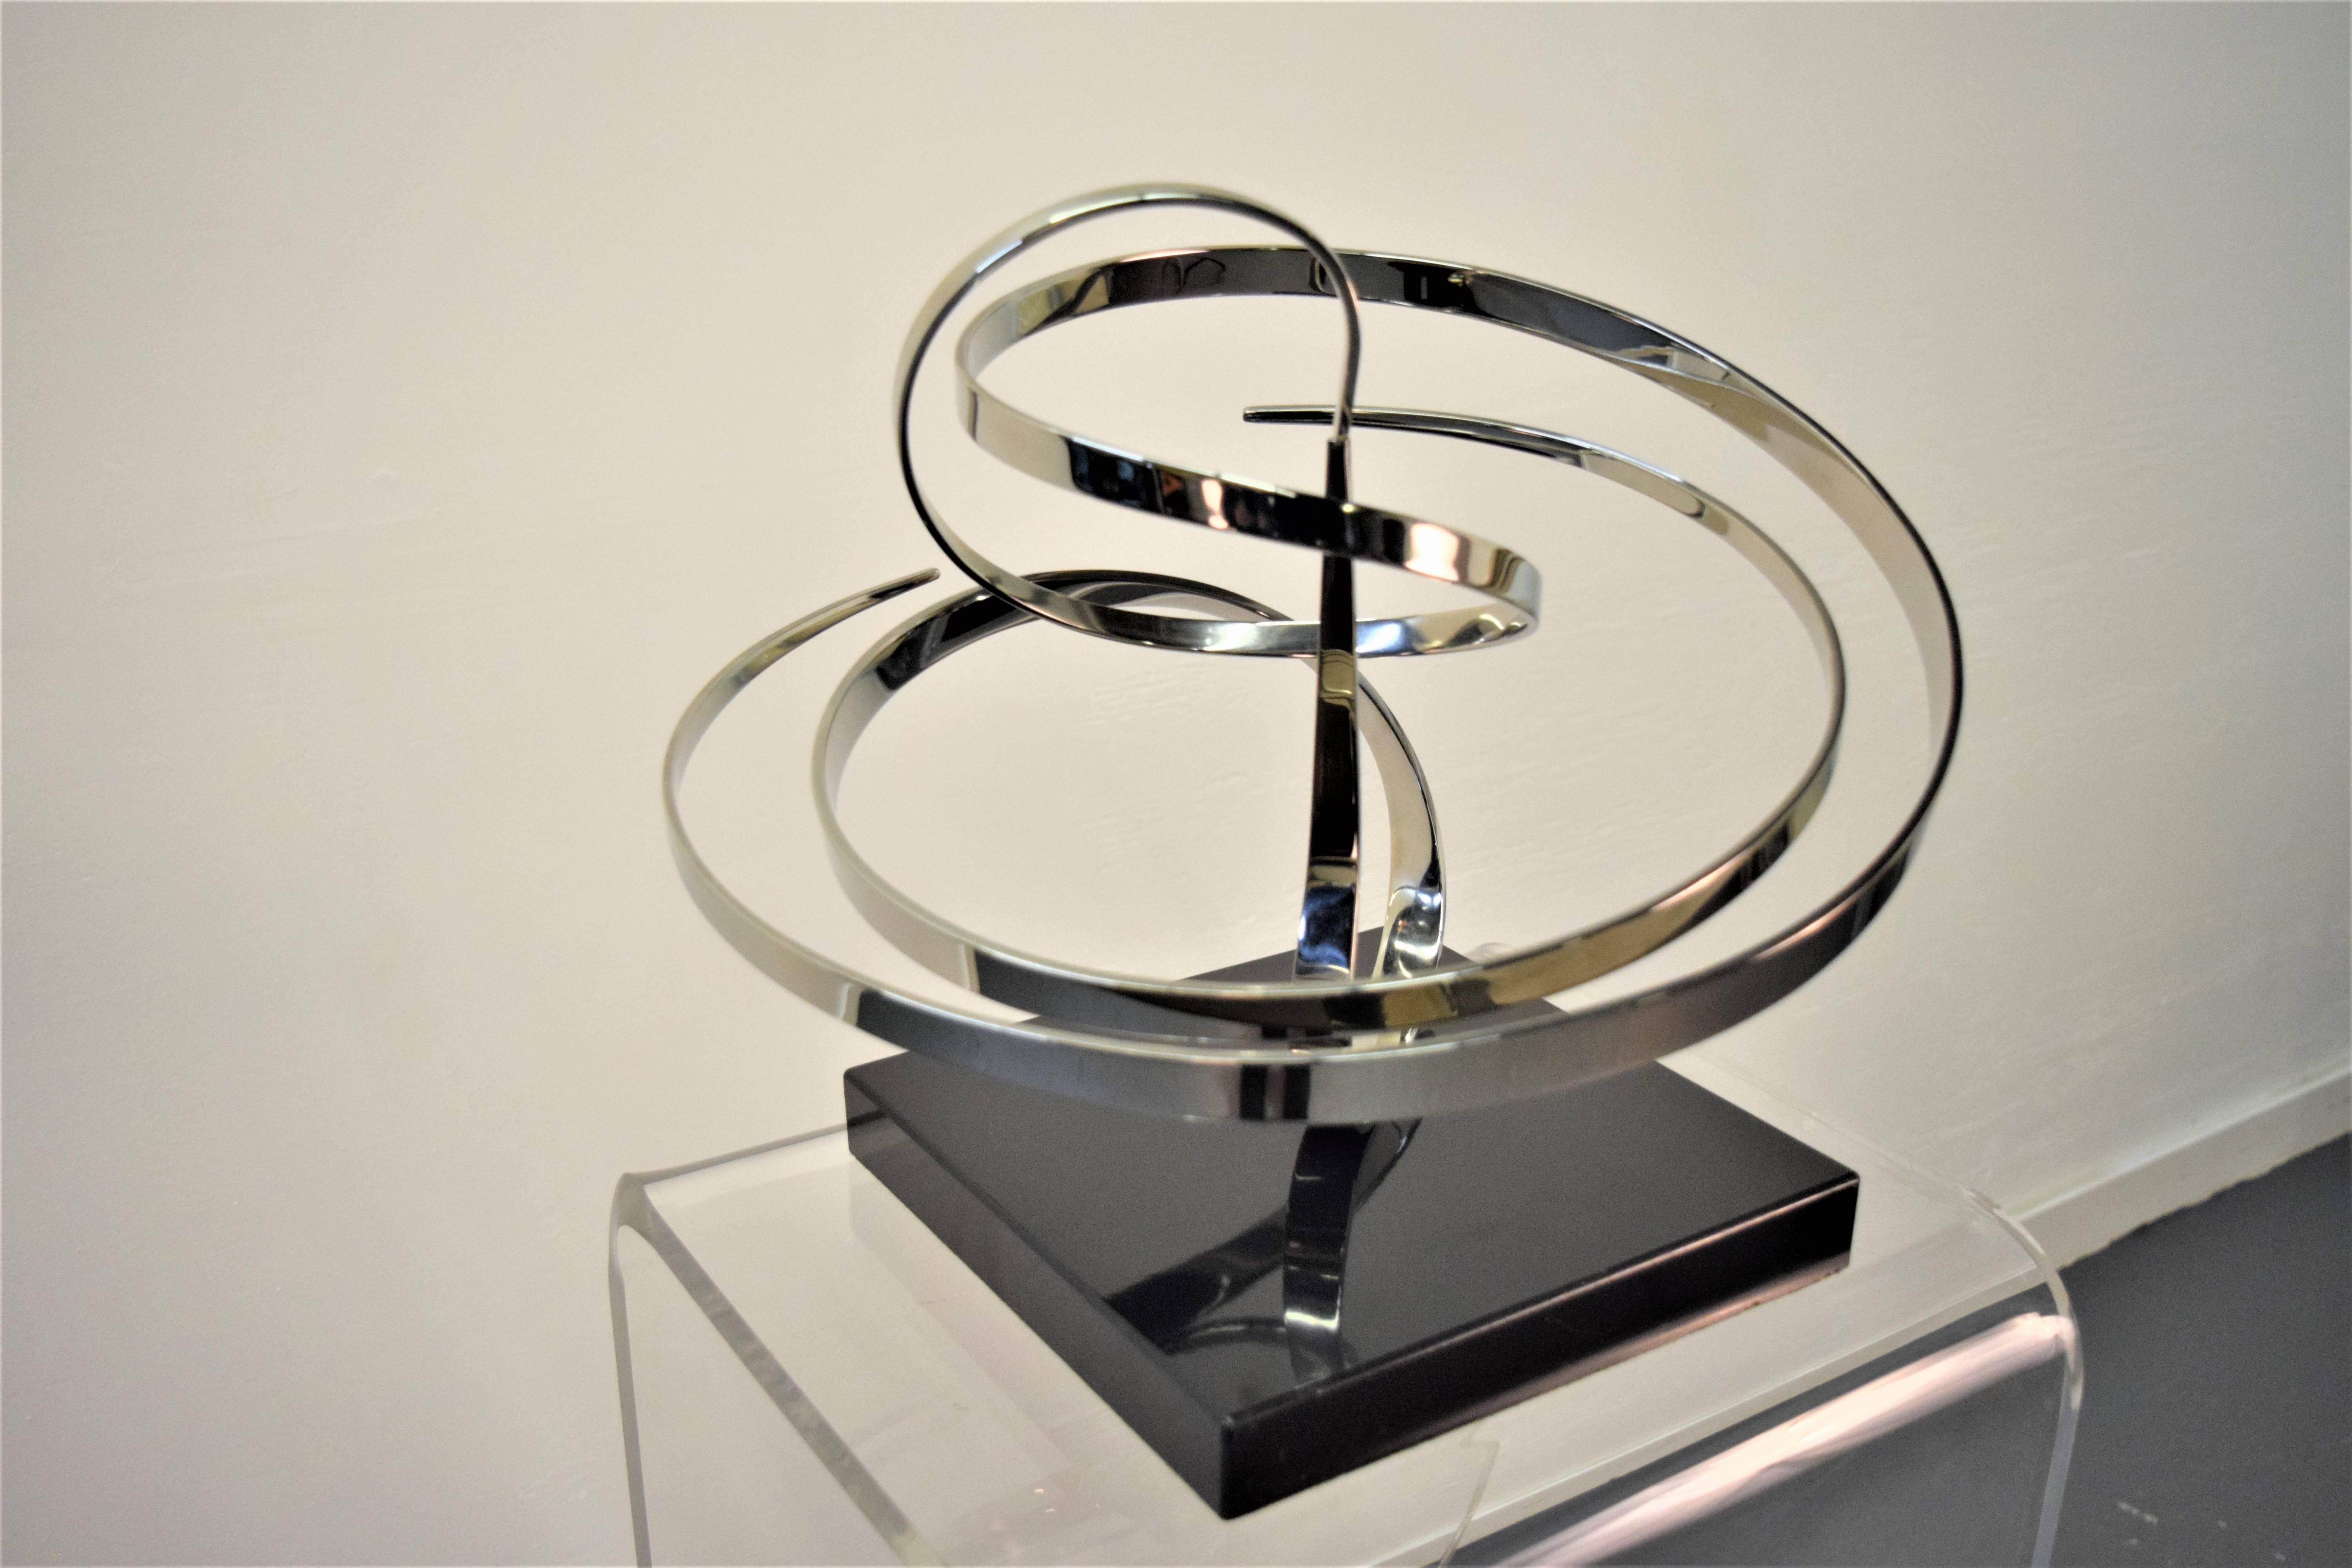 kinetic sculptures for sale